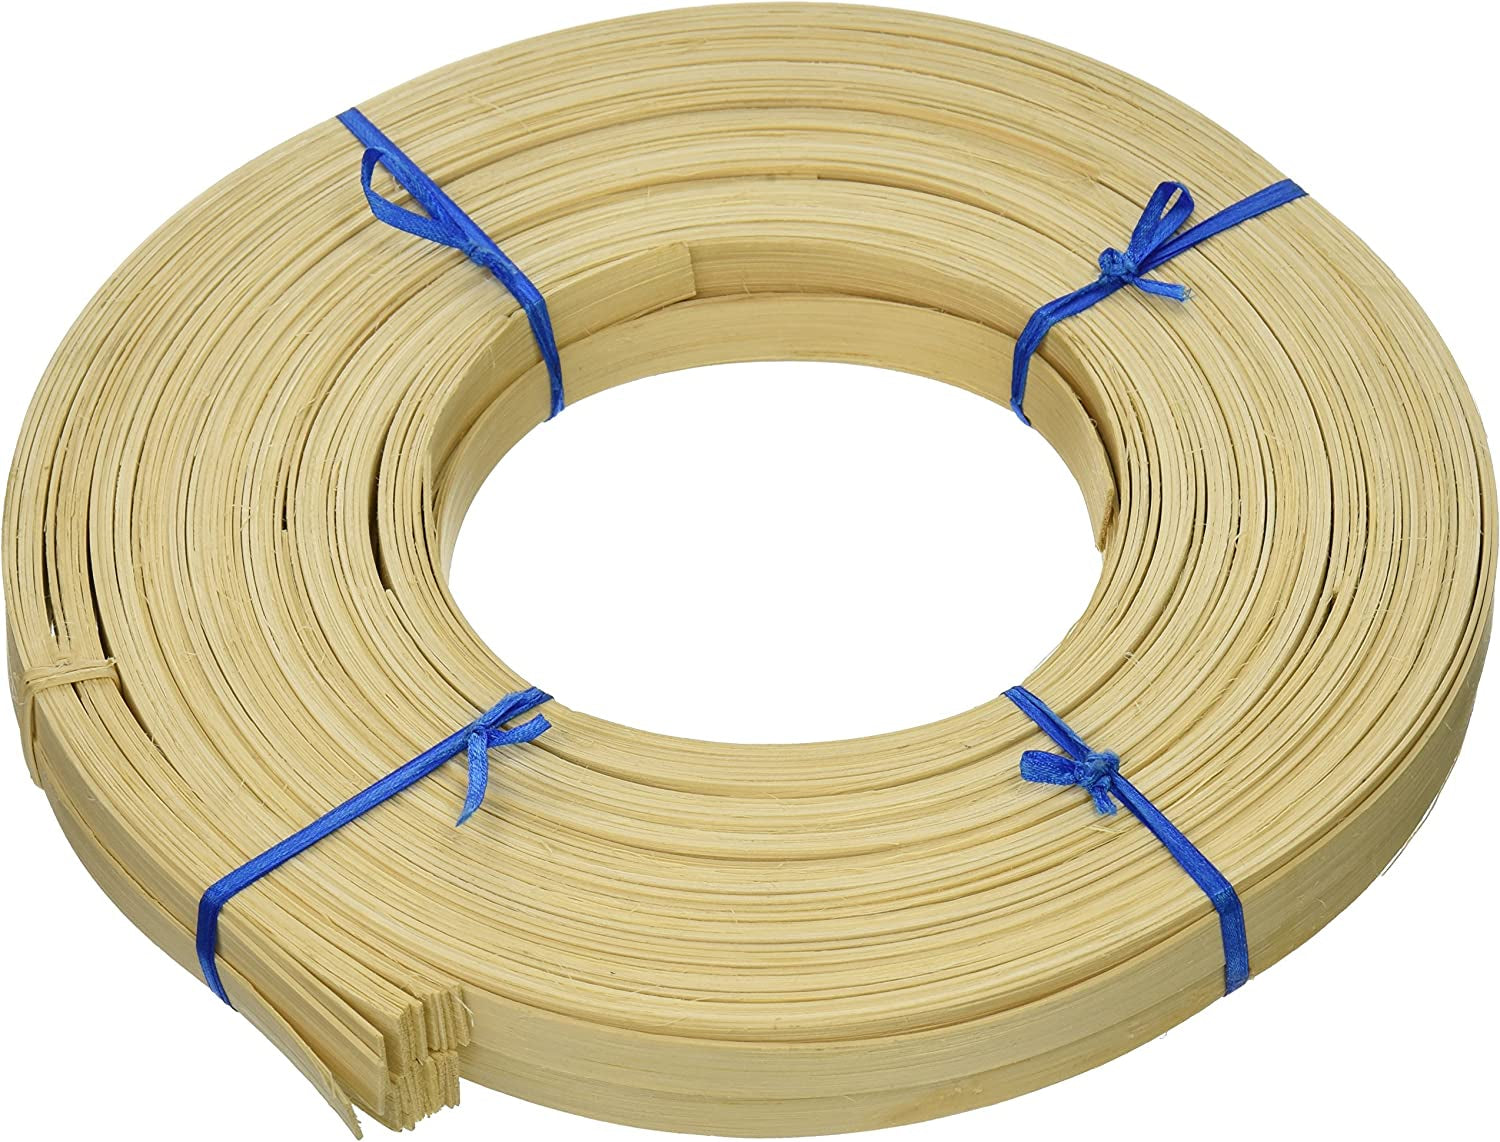 12FC Flat Reed 1/2-Inch 1-Pound Coil, Approximately 185-Feet